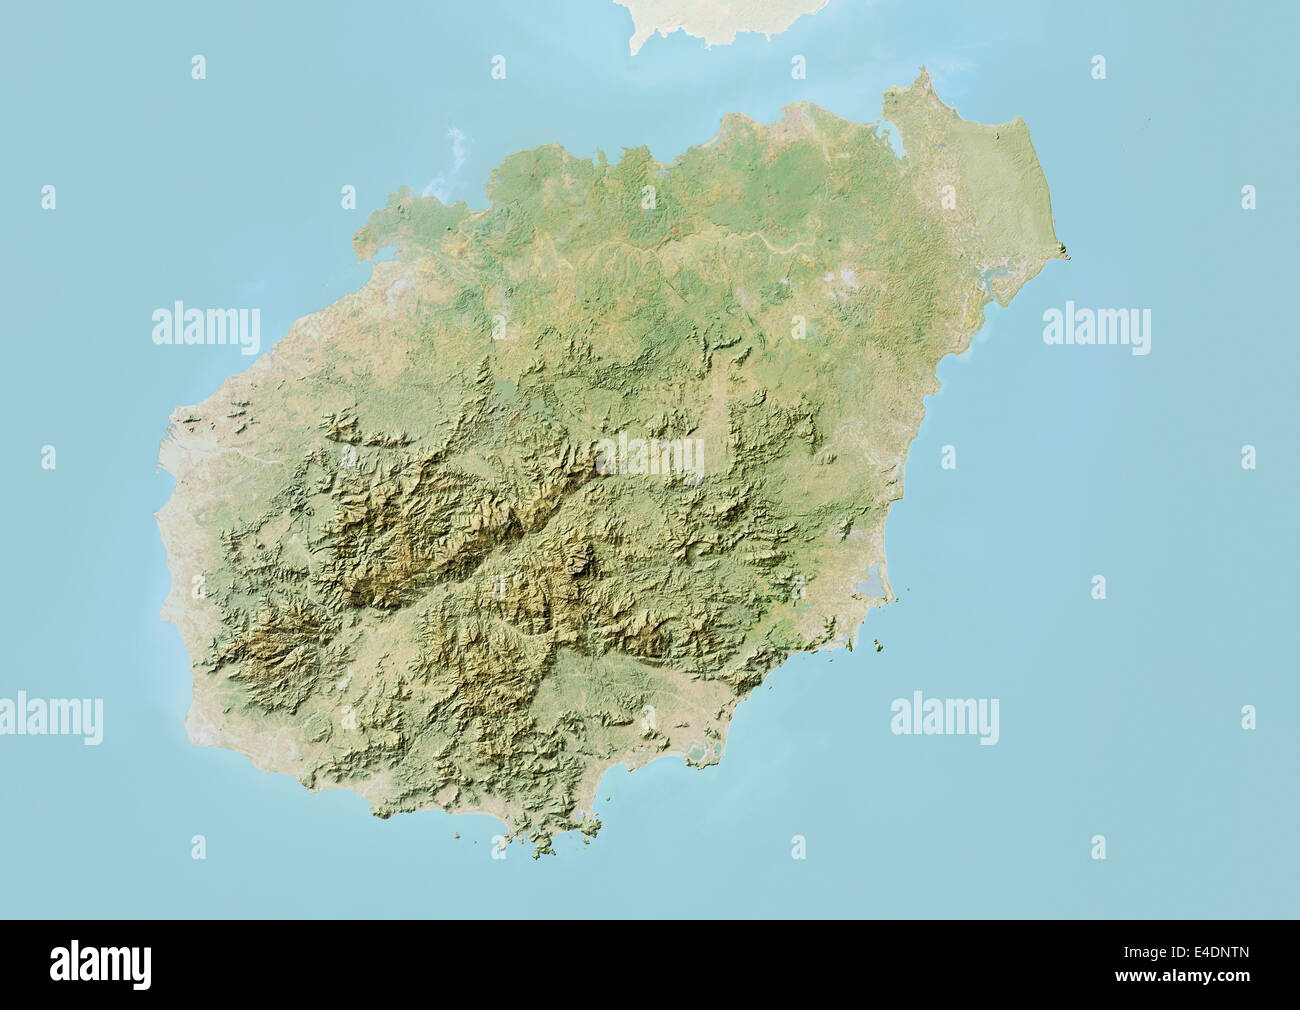 Province of Hainan, China, Relief Map Stock Photo